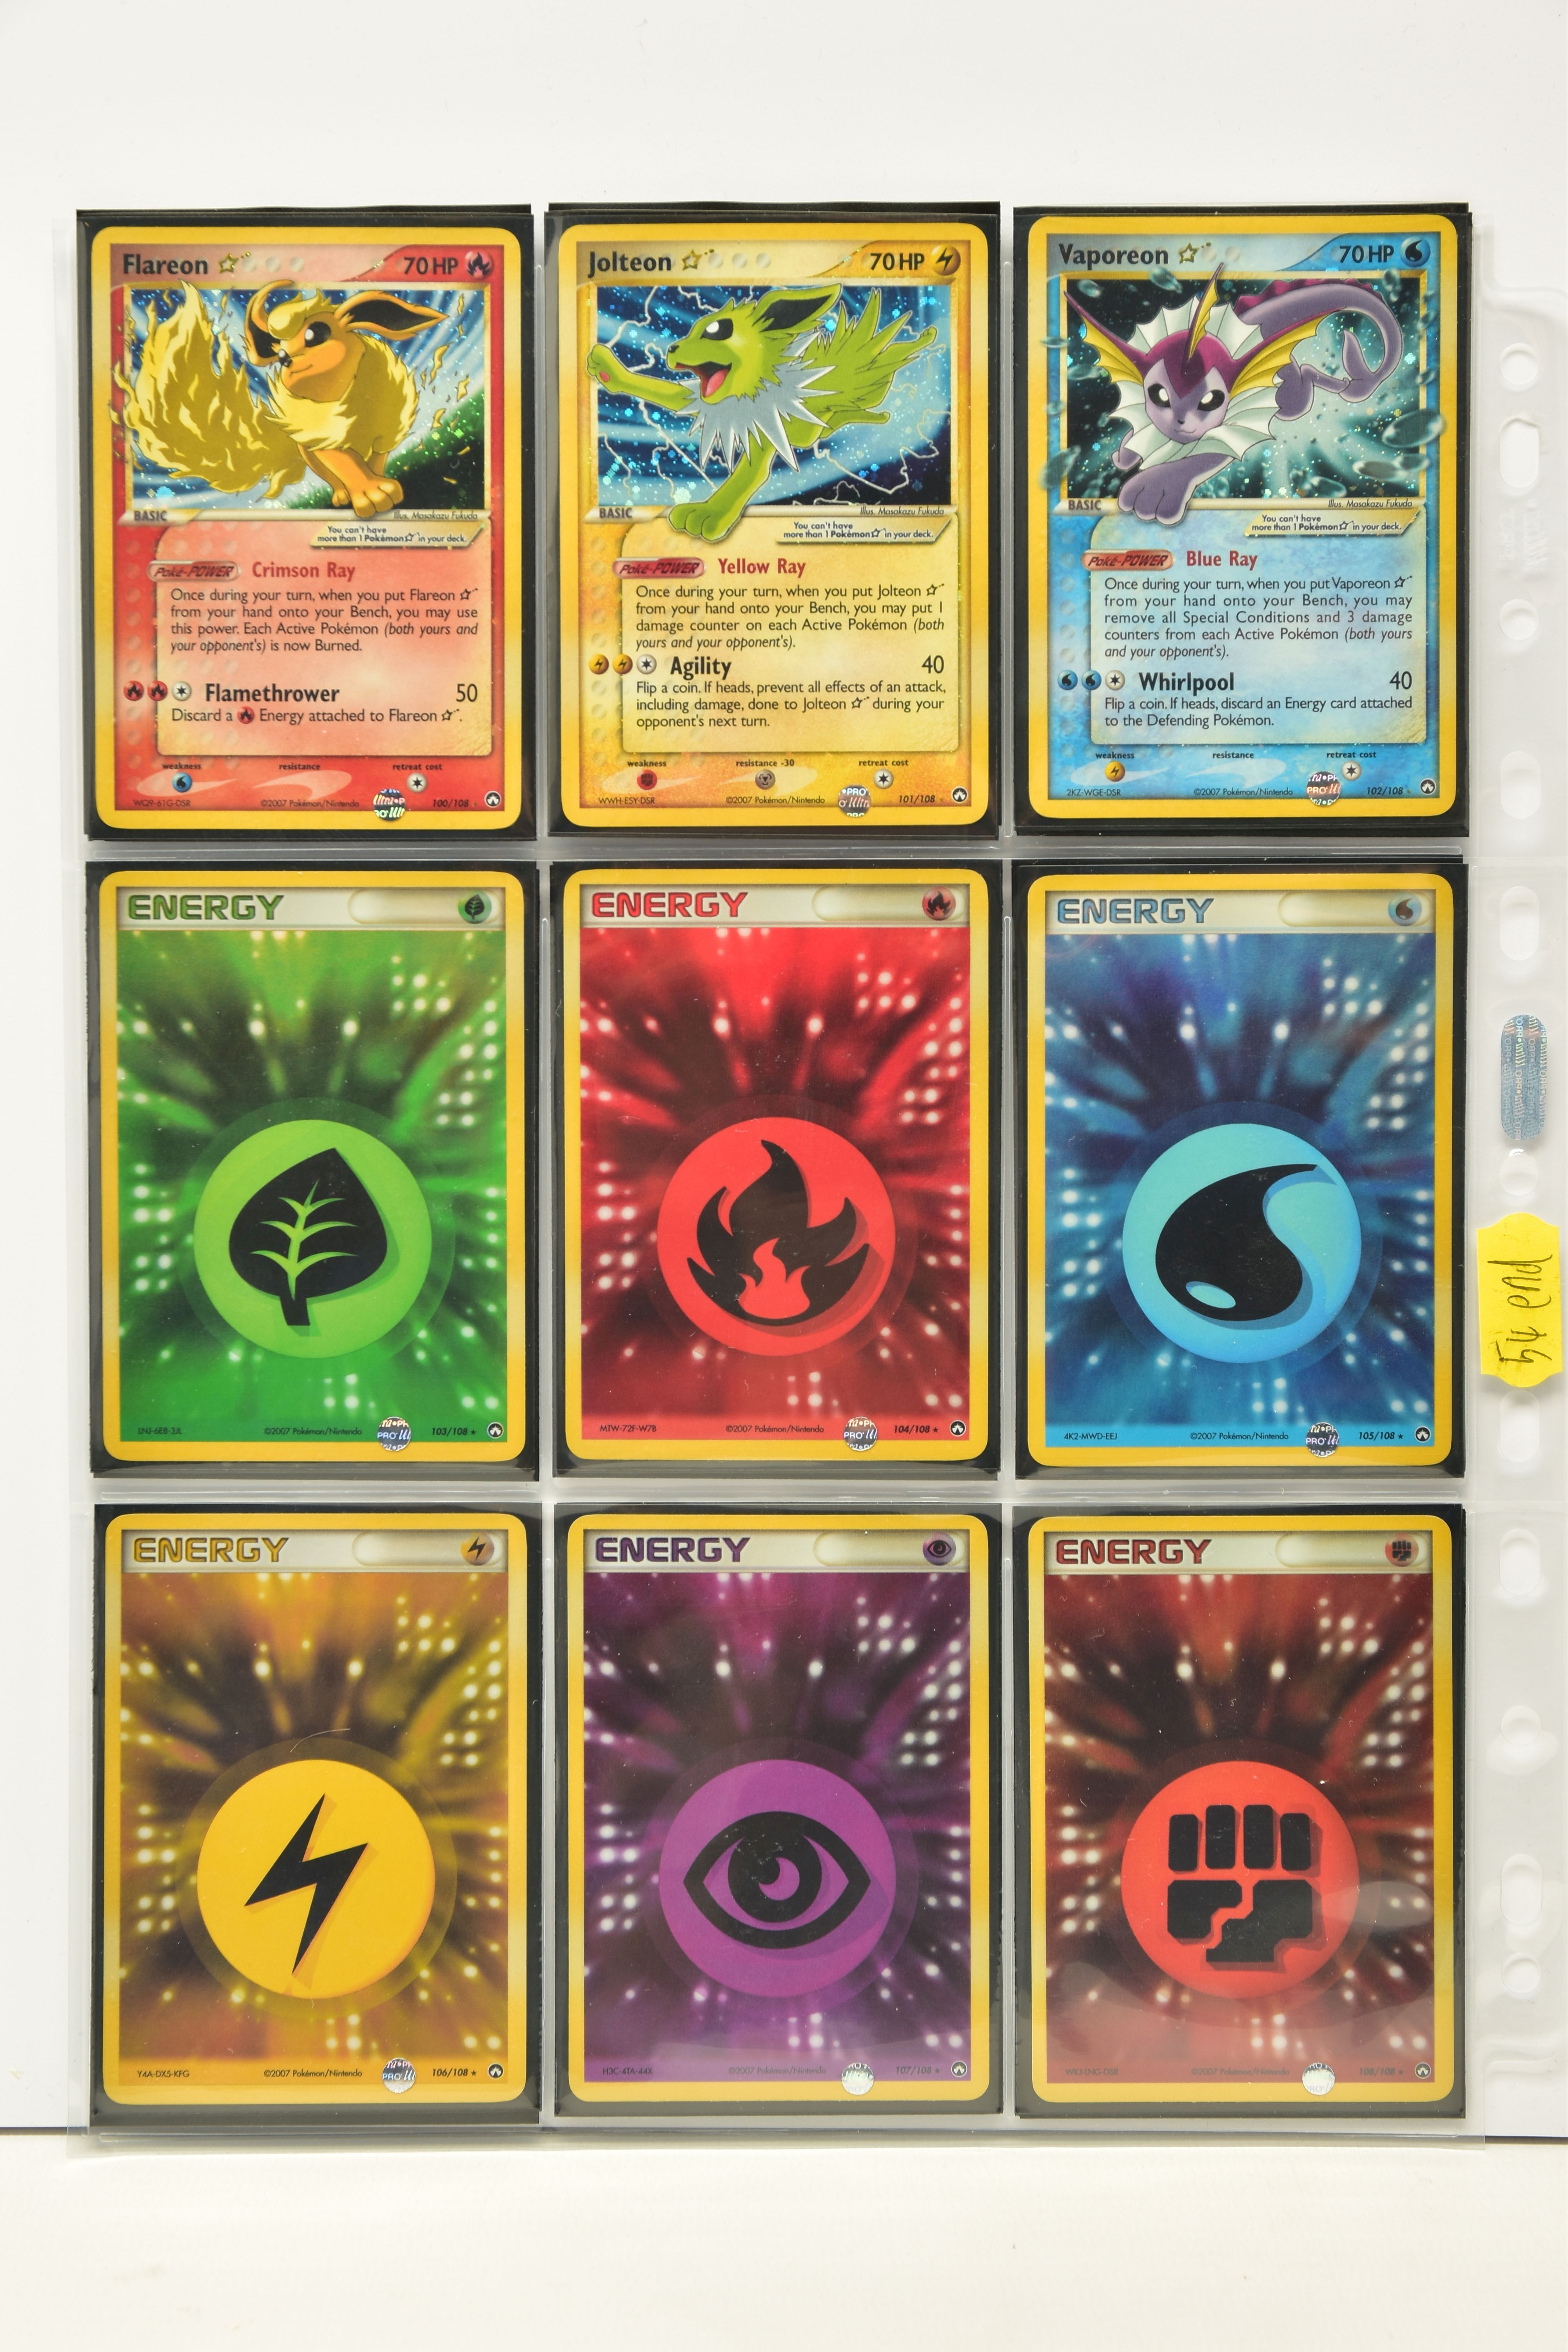 COMPLETE POKEMON EX POWER KEEPERS SET, all cards are present (including all gold star cards), - Image 12 of 12